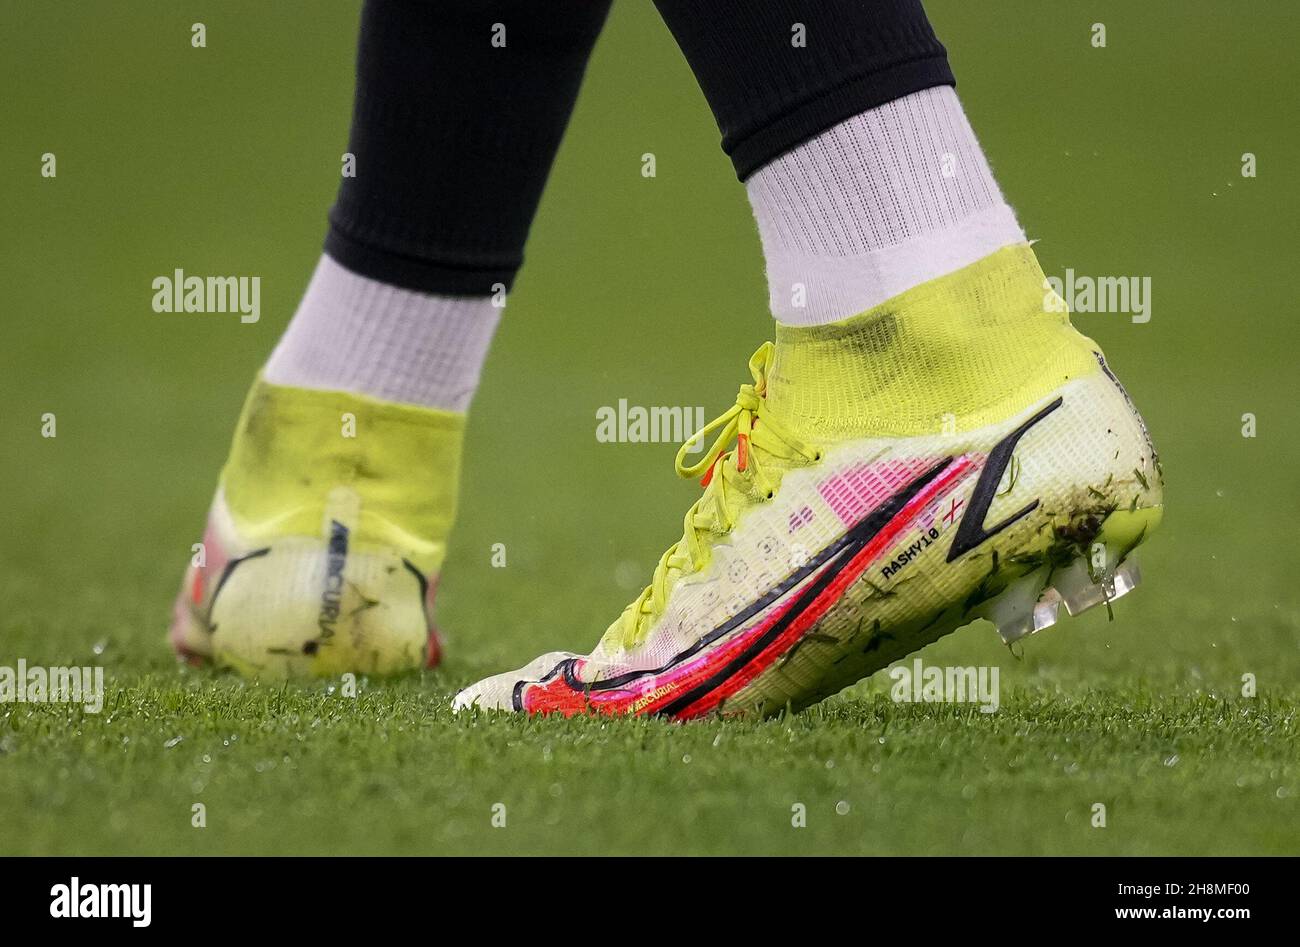 London, UK. 28th Nov, 2021. The Nike Mercurial football boots of Marcus  Rashford of Man Utd displaying Rashy10 and England flag during the Premier  League match between Chelsea and Manchester United at